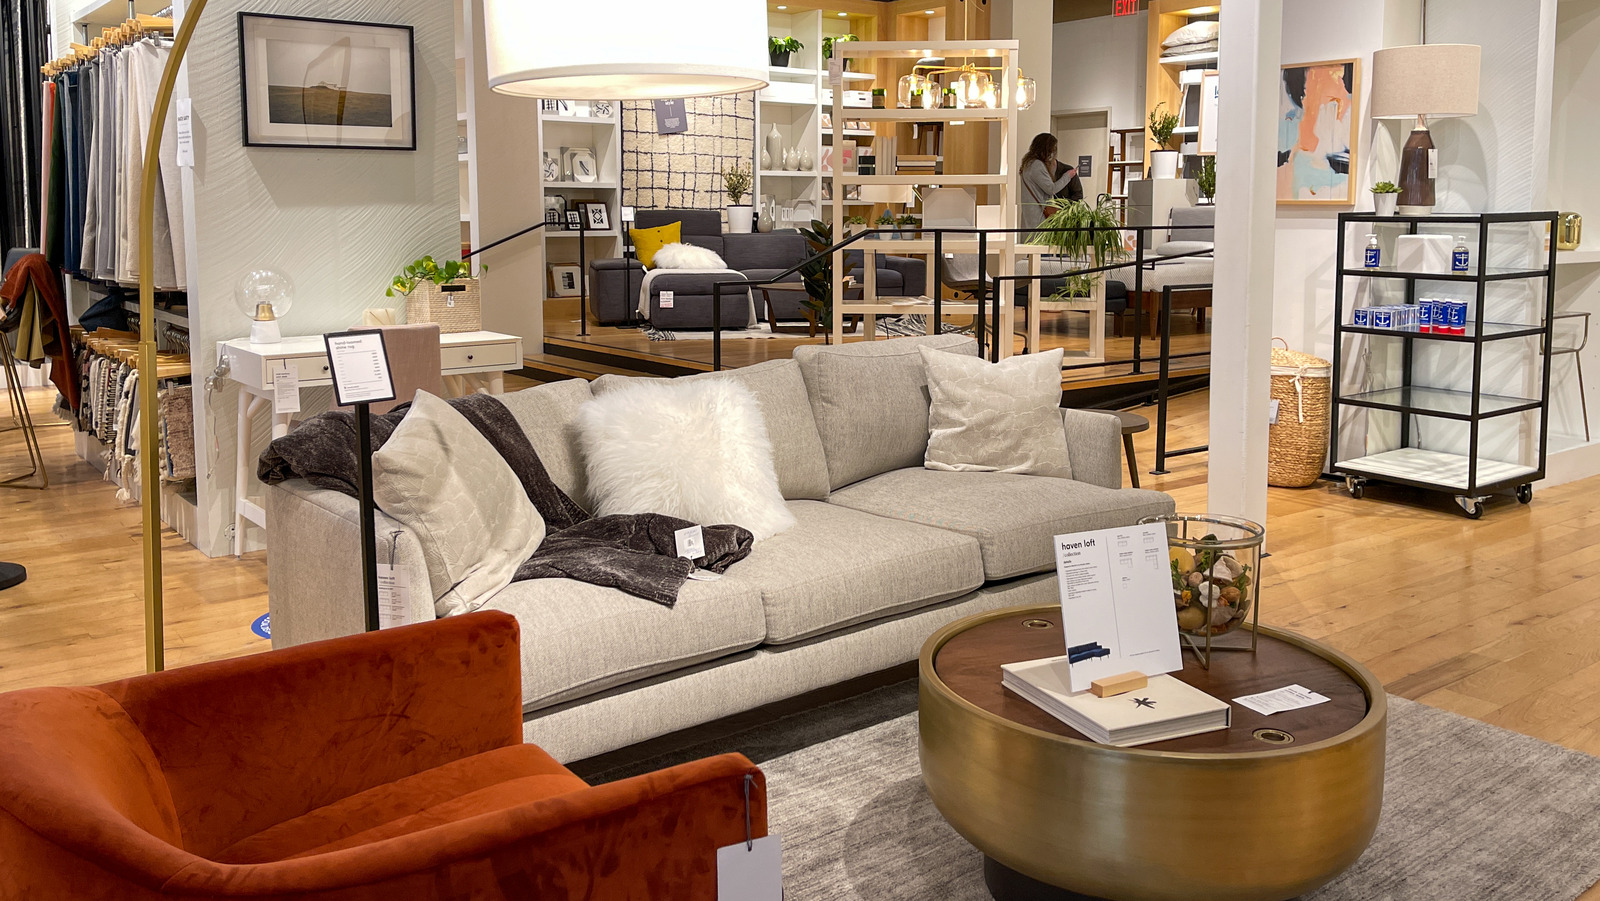 15 Game-Changing West Elm Shopping Secrets From an Insider